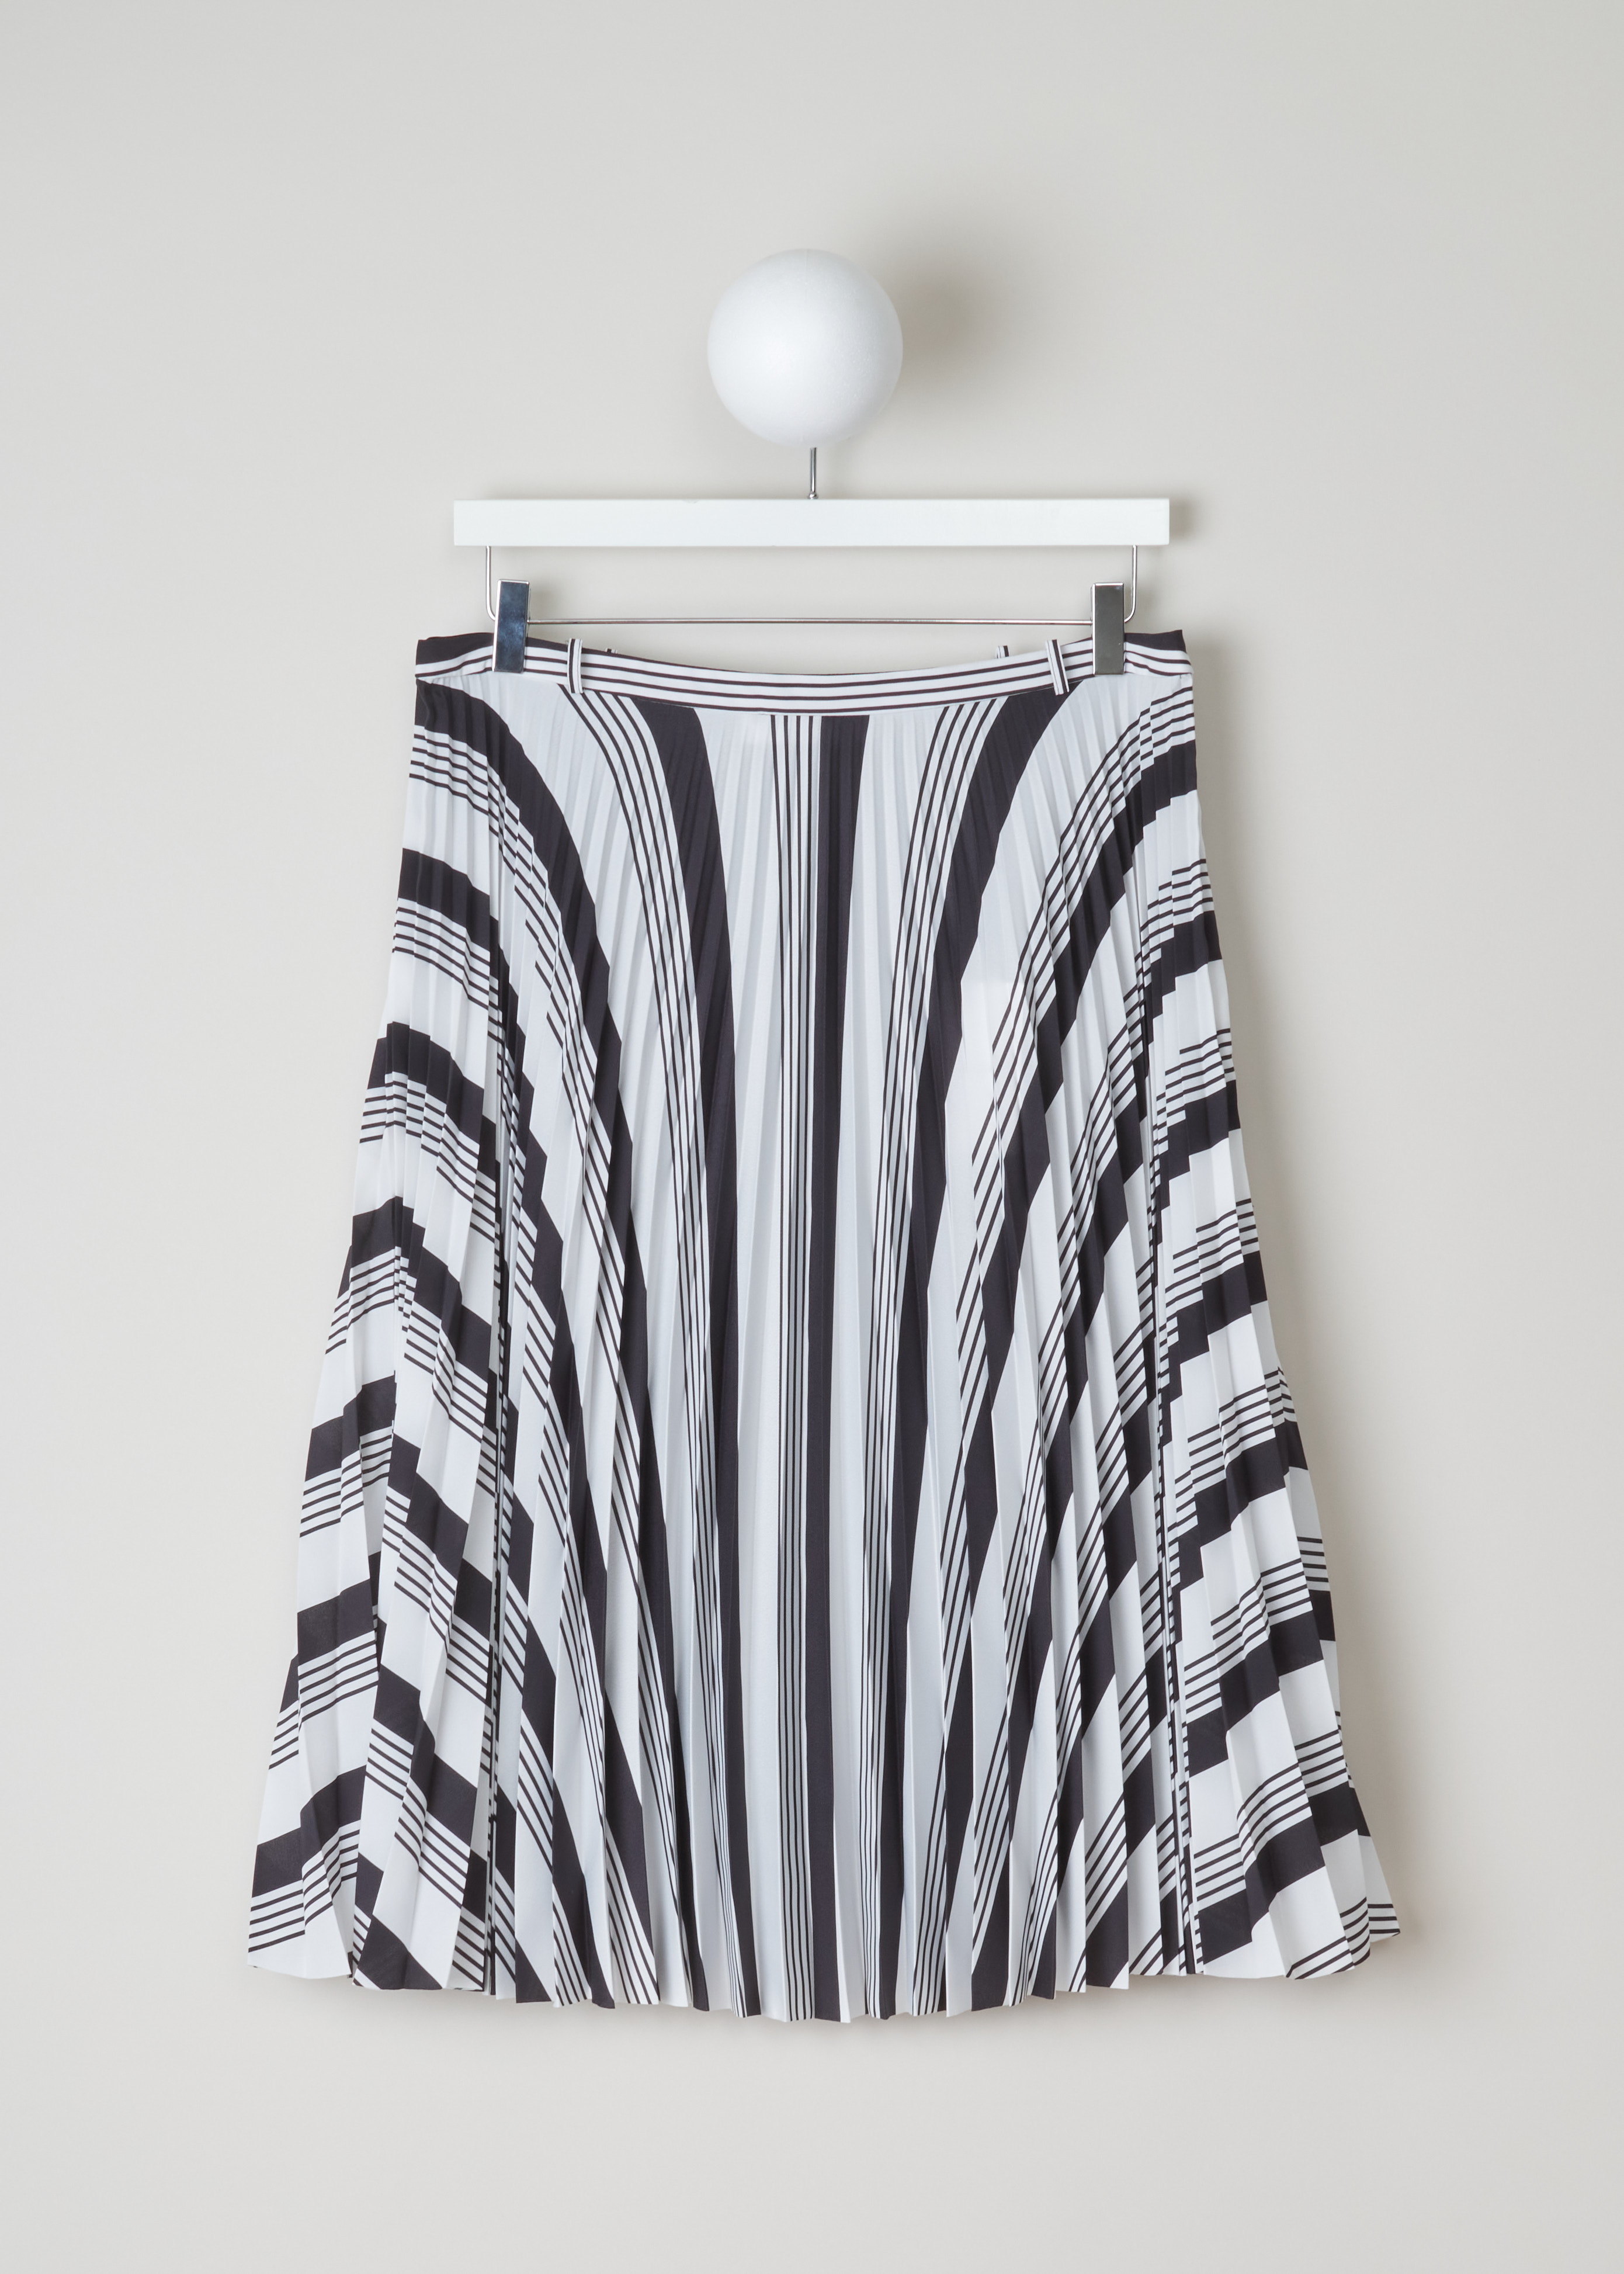 Balenciaga Striped pleated skirt 501971_TYA43_1070 noir blanc front. White plissé skirt with curved black stripe pattern, small waistband with four belt hoops, invisible zipper and slit on the side.